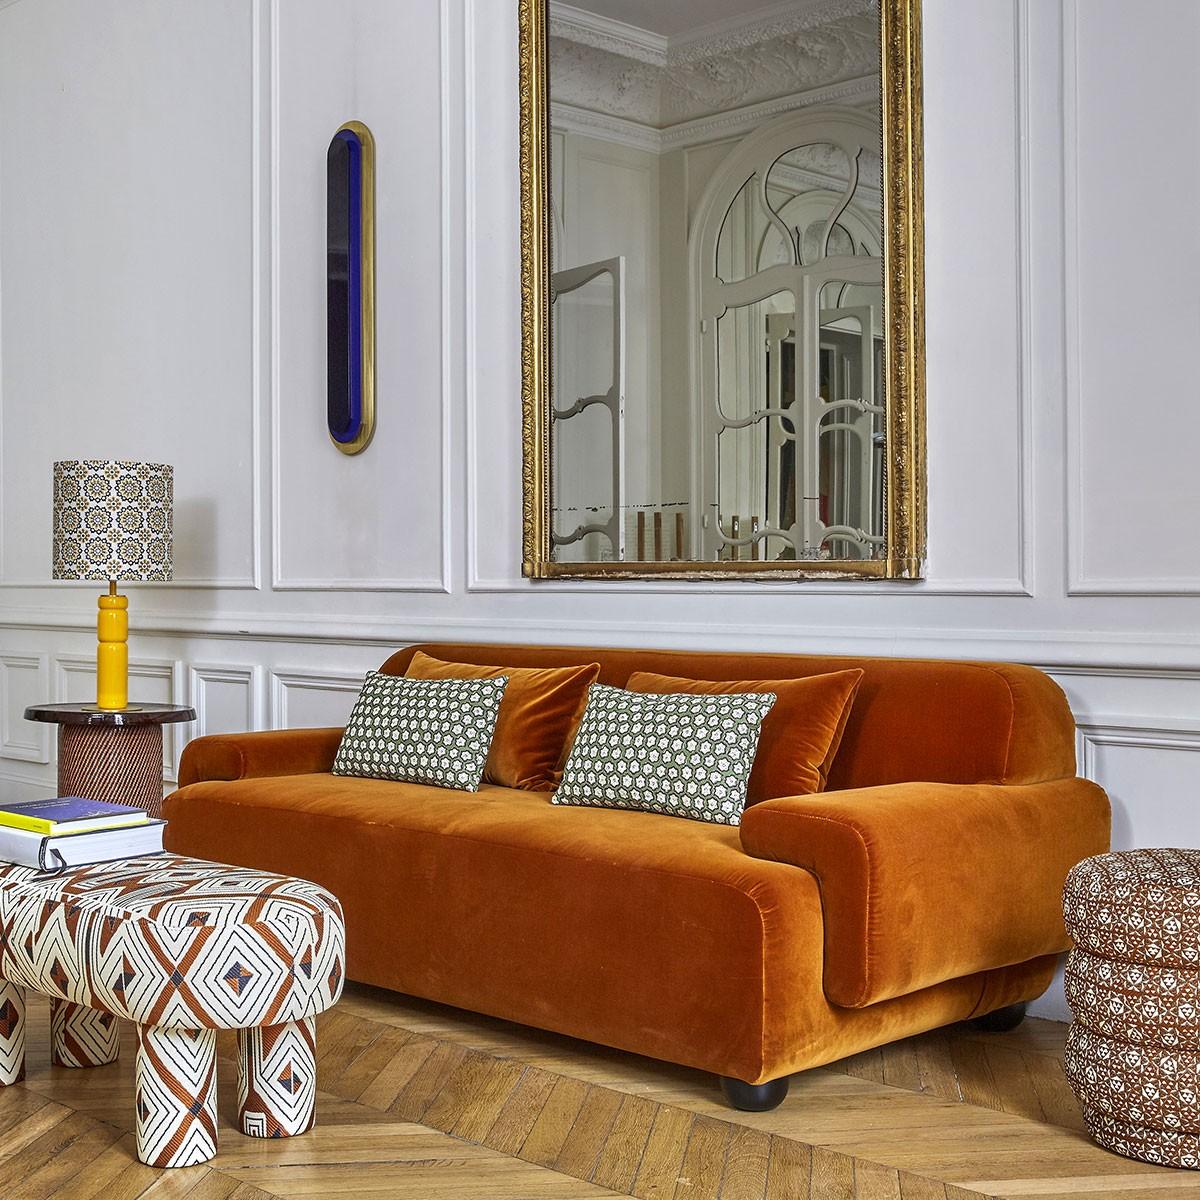 Popus Editions Lena 3 Seater Sofa in Marrakesh London Linen Fabric
 
It looks like it's straight out of a movie, with its generous curves and wide armrests. It is a real invitation to spend long Sundays with the family, comfortably seated in front